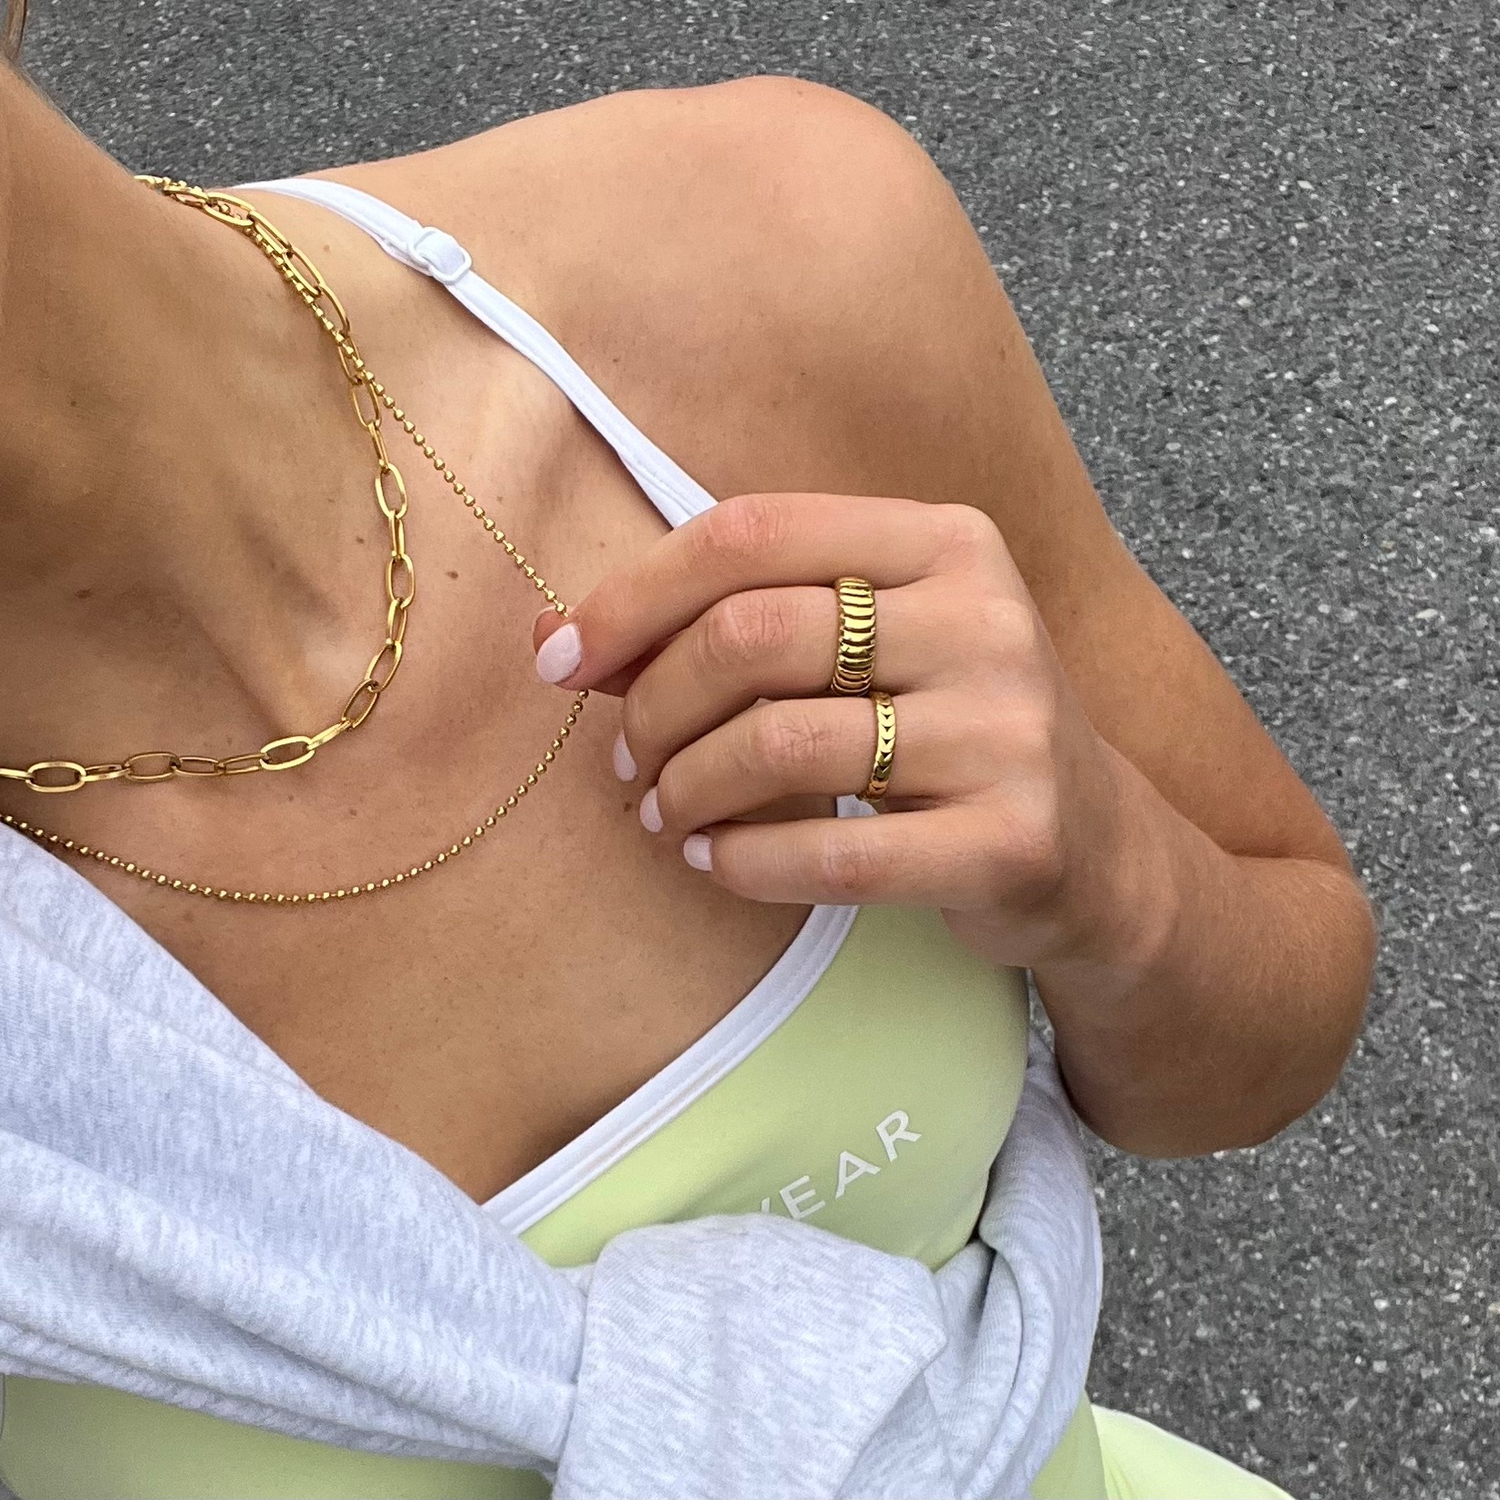 EVER_Activewear_jewellery_Gold_Necklace_and_Ring_Bundle_Set_sweat_resistant_waterproof_anti-tarnish_durable_lifestyle_wearing_activewear_walking_outside